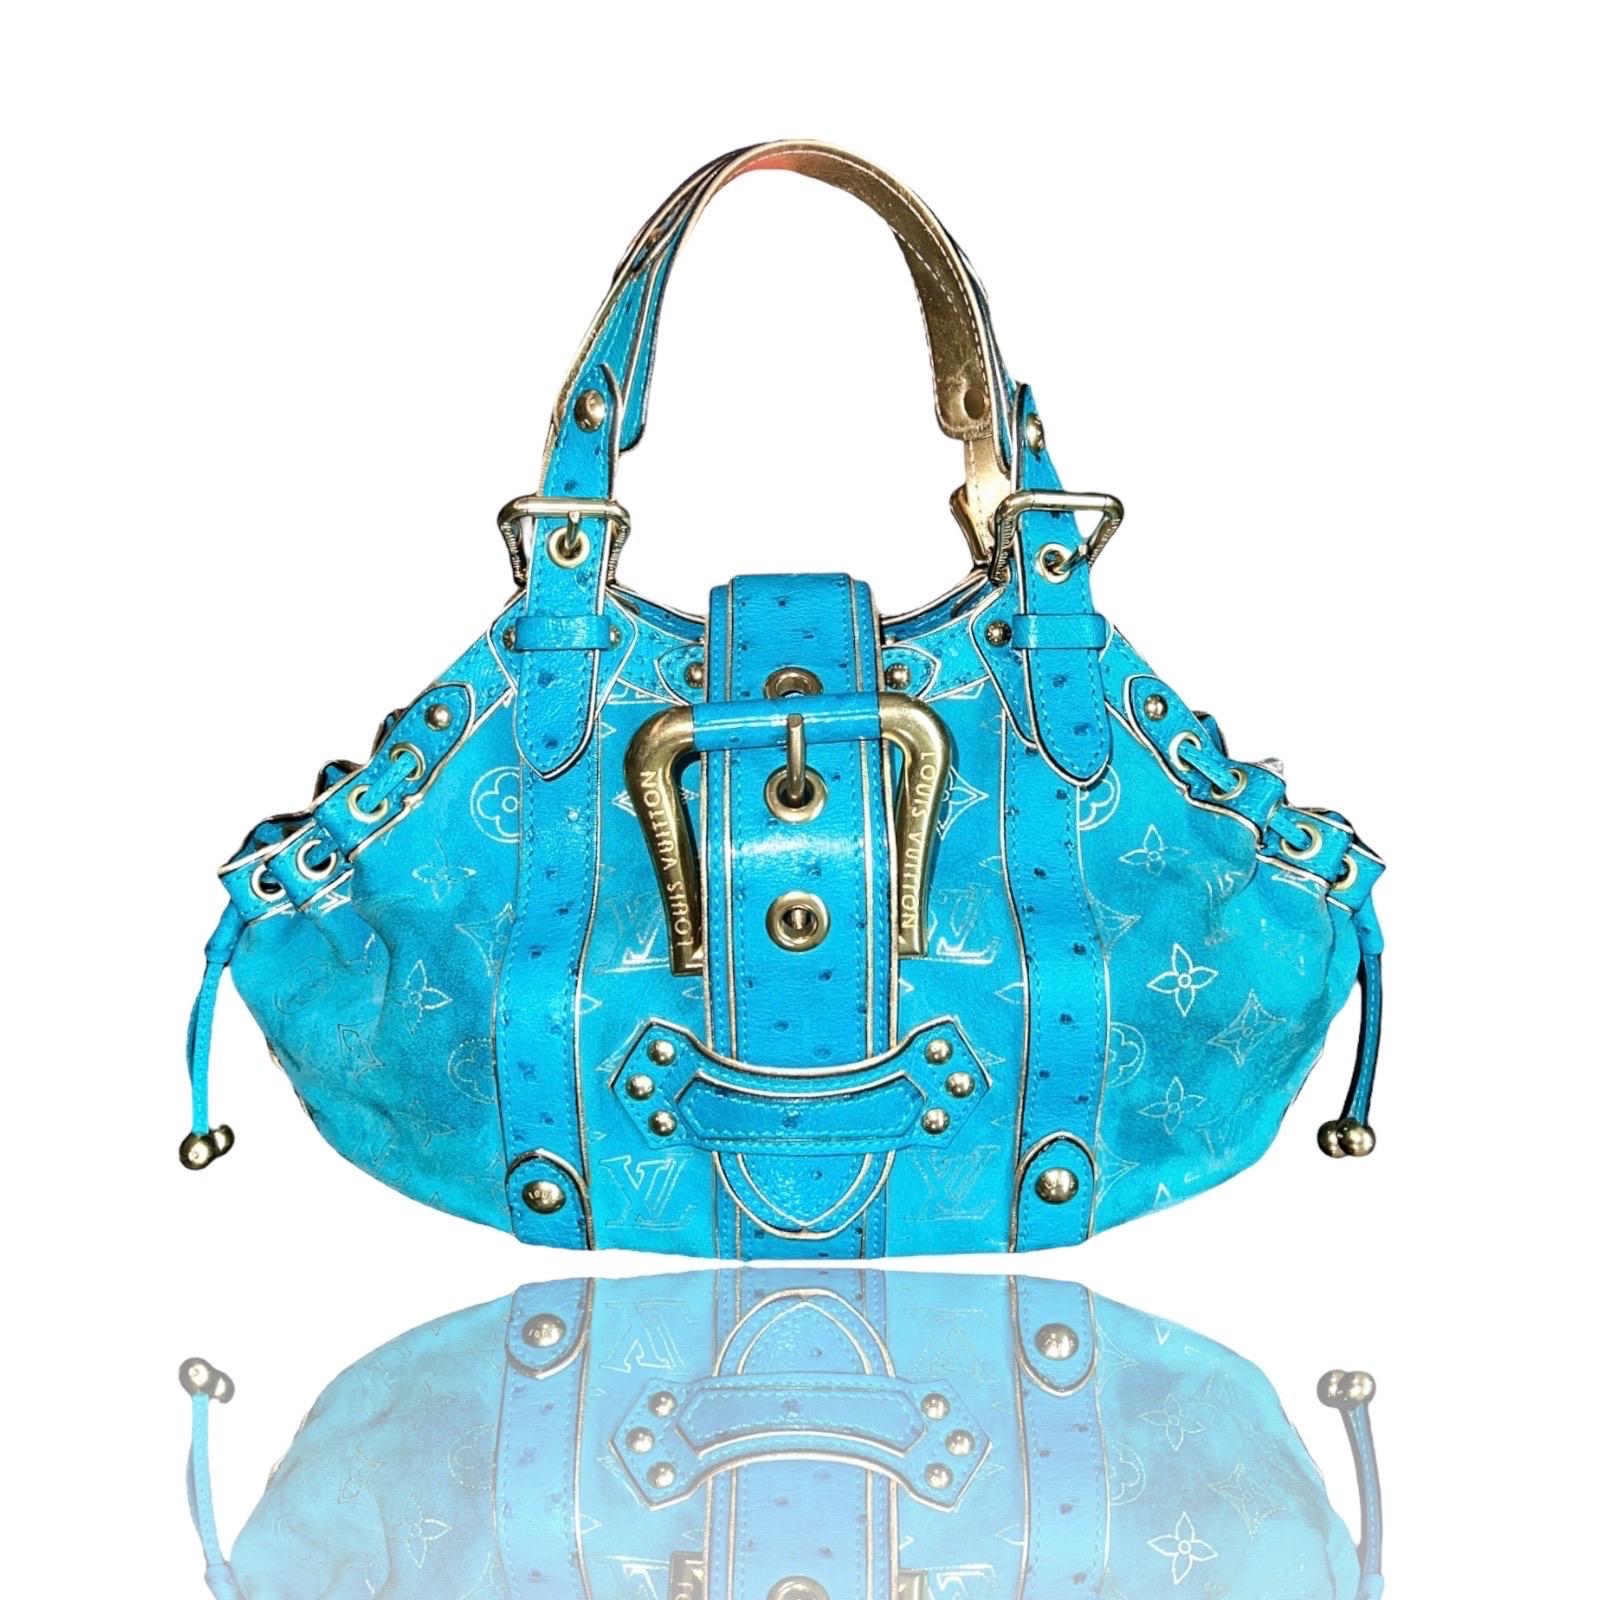 A stunning turquoise & gold suede and ostrich skin bag by Louis Vuitton
Designed by Marc Jacobs
This bag was produced in a very limited edition and made to order 
Finest suede leather imprinted with the famous LV monogram logo
Golden hardware
Edges